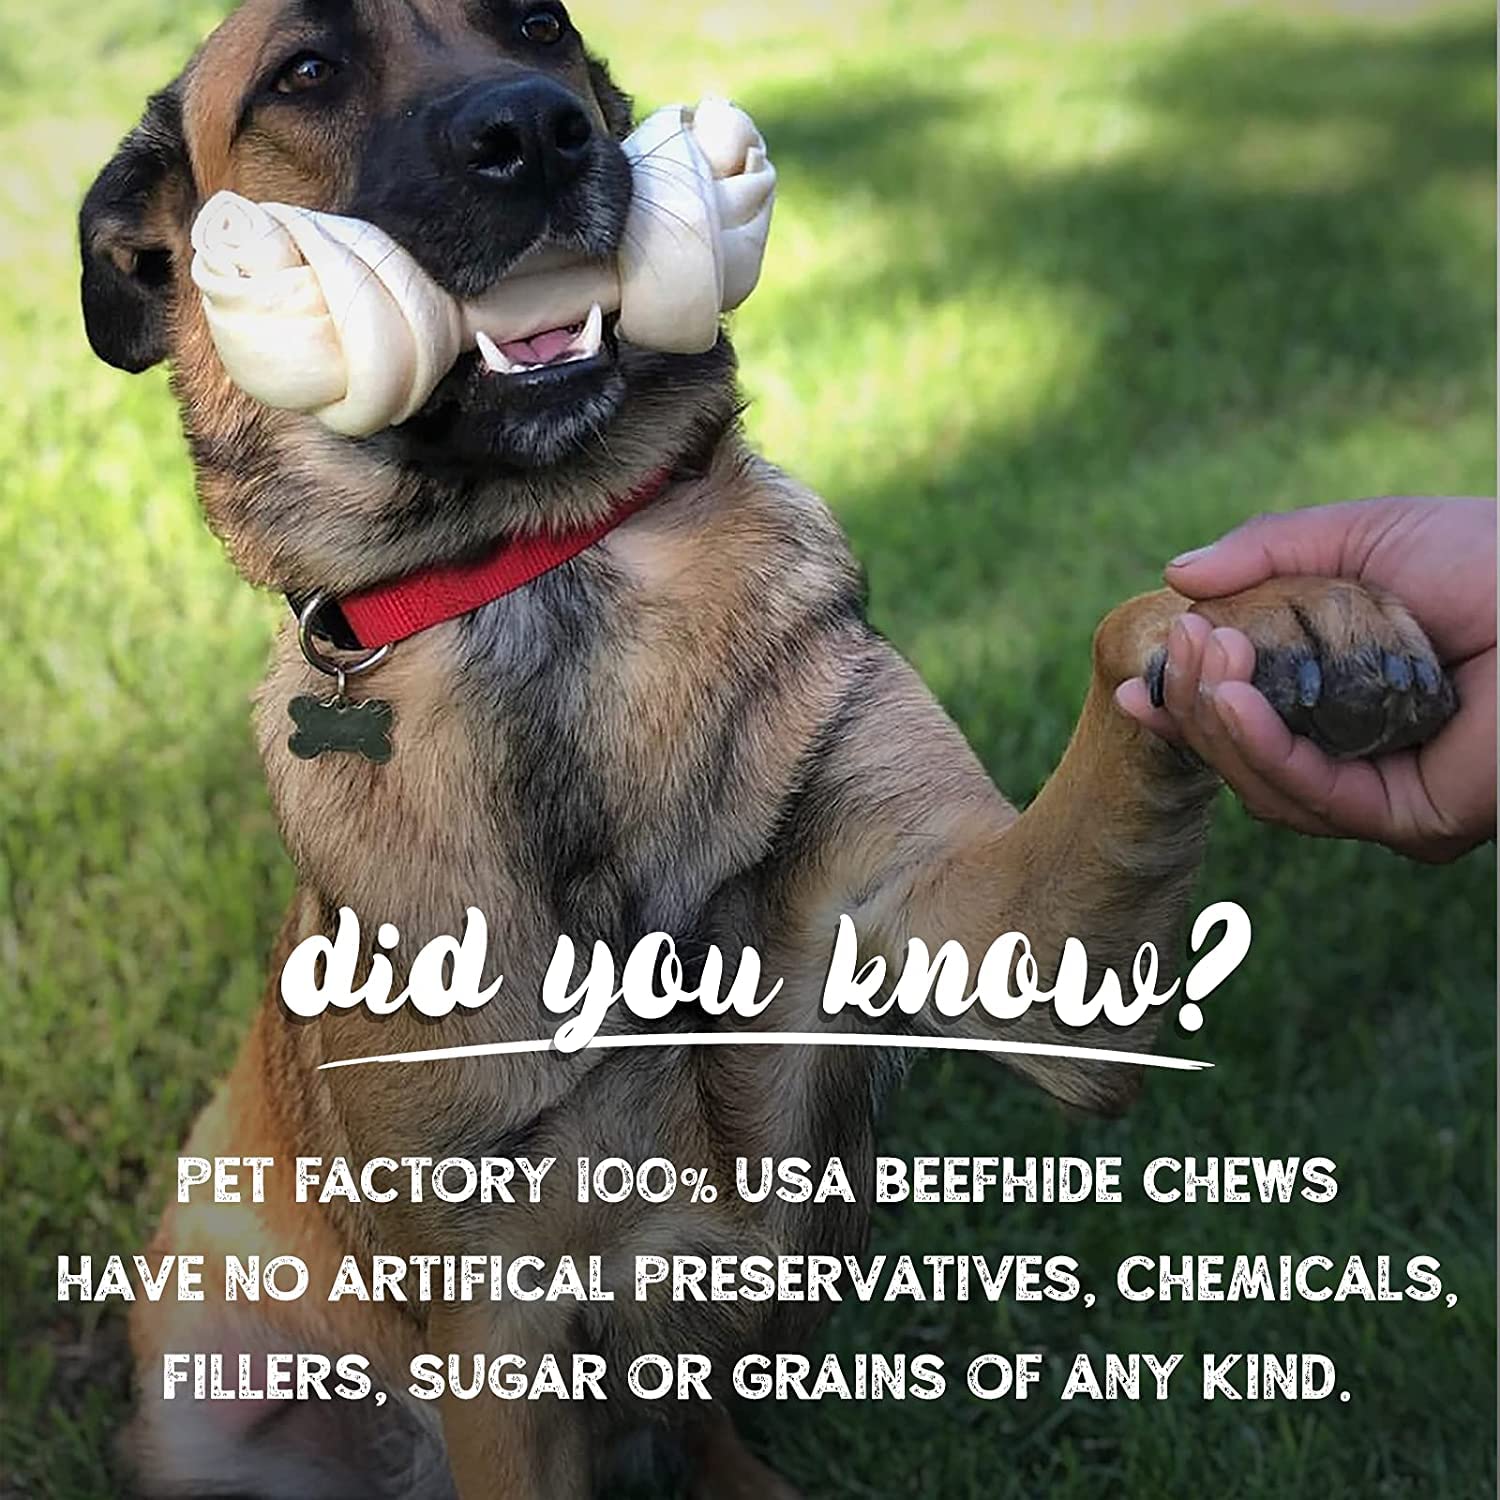 Pet Factory 100% Made in USA Beefhide Chips Dog Chew Treats - Natural Flavor, 8 oz